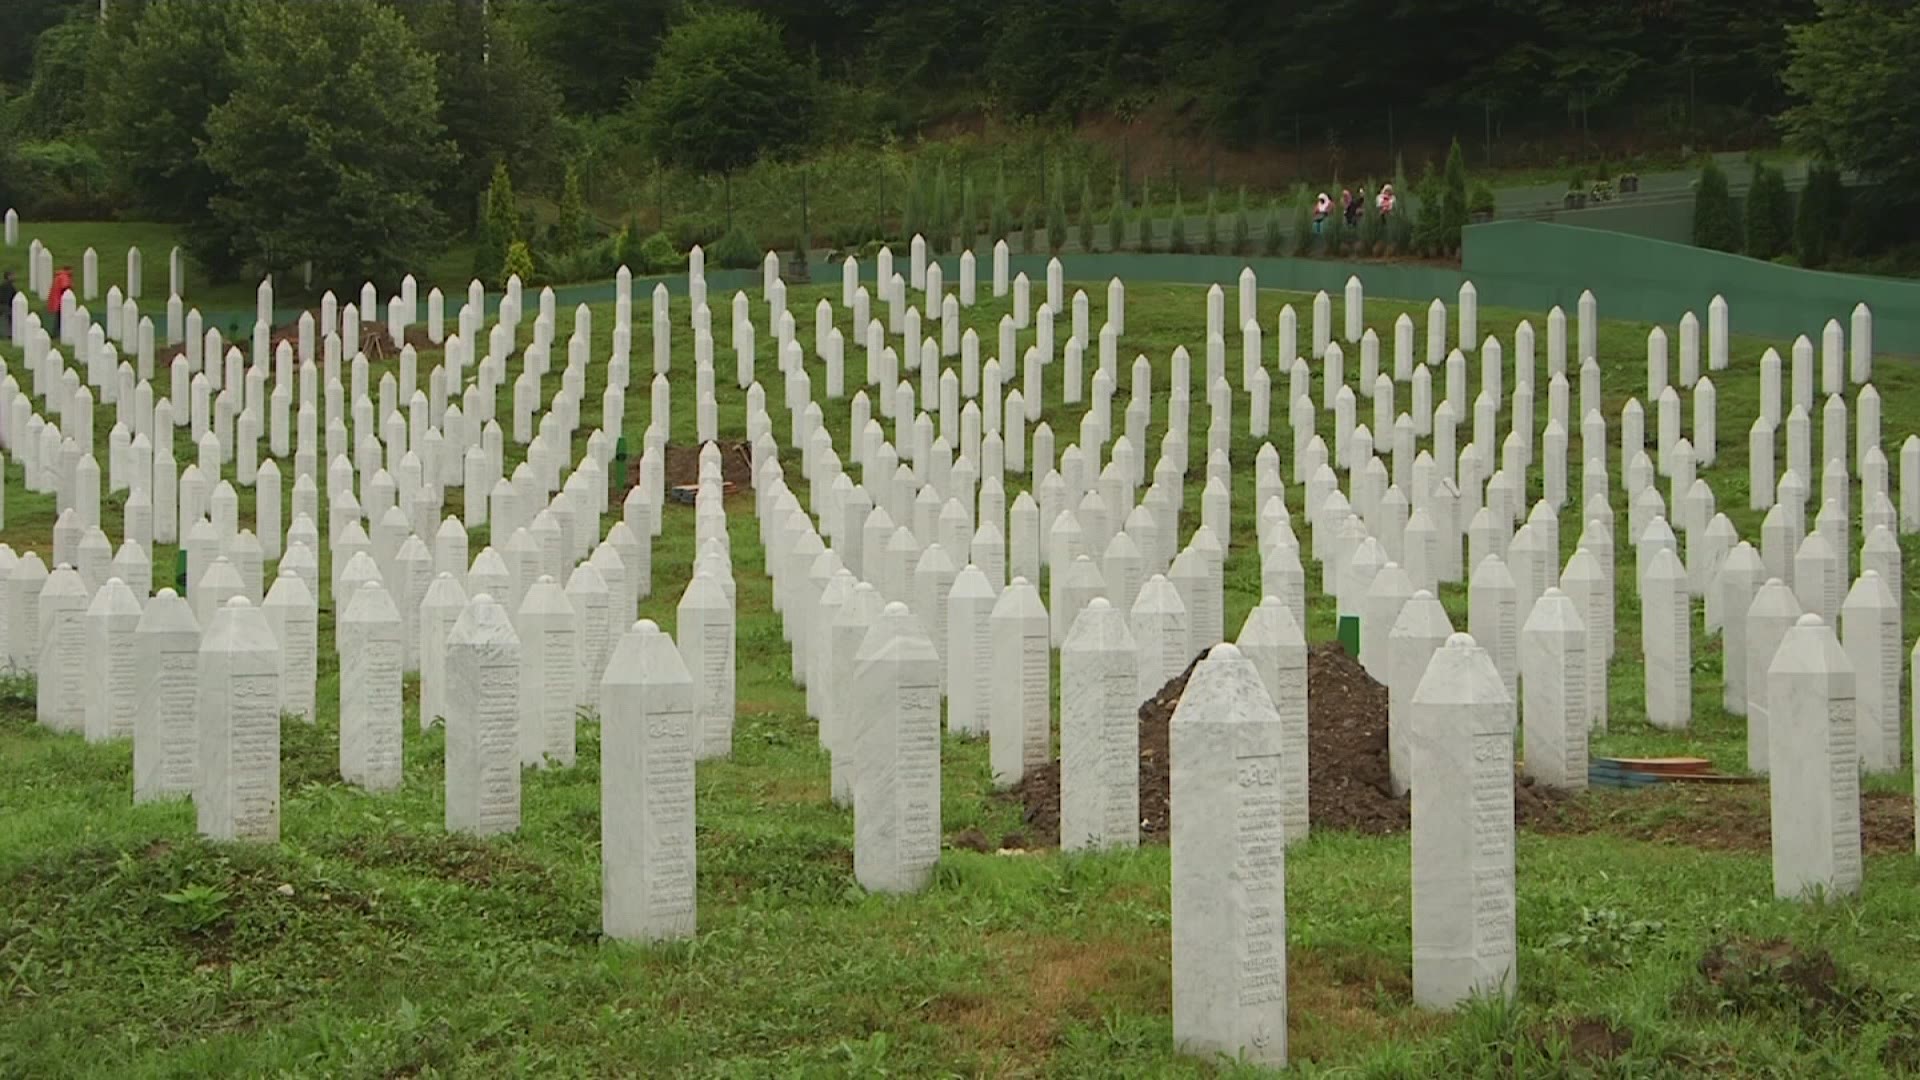 Bereaved families gathered at a cemetery in the Bosnian town of Srebrenica on Wednesday, the eve of the 24th anniversary of the Srebrenica massacre.